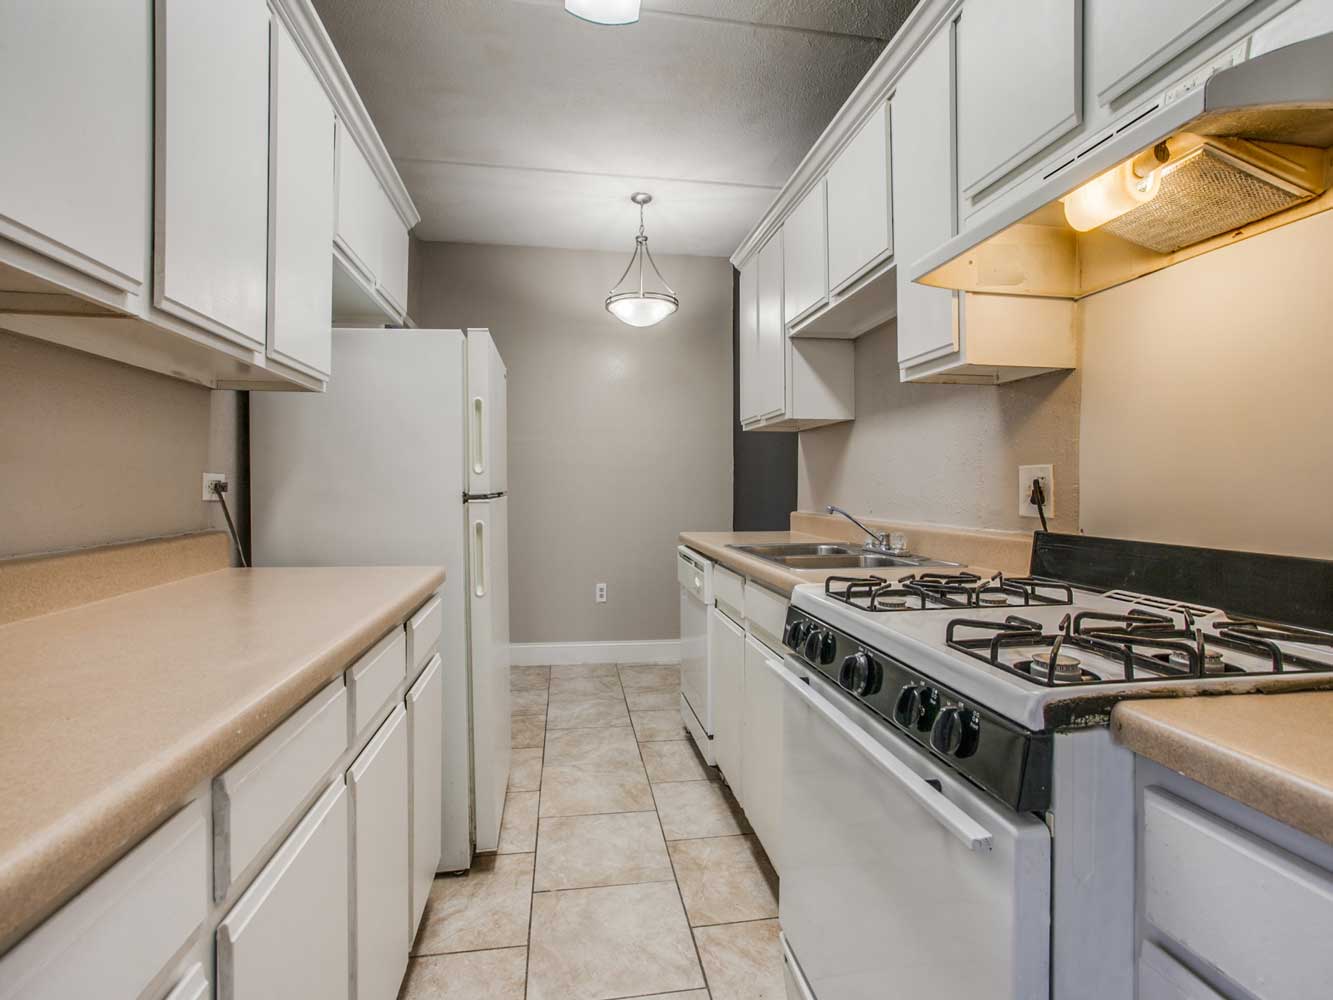 Galley-Style Kitchen at Villas on Sixty Fifth Apartments in Little Rock, Arkansas